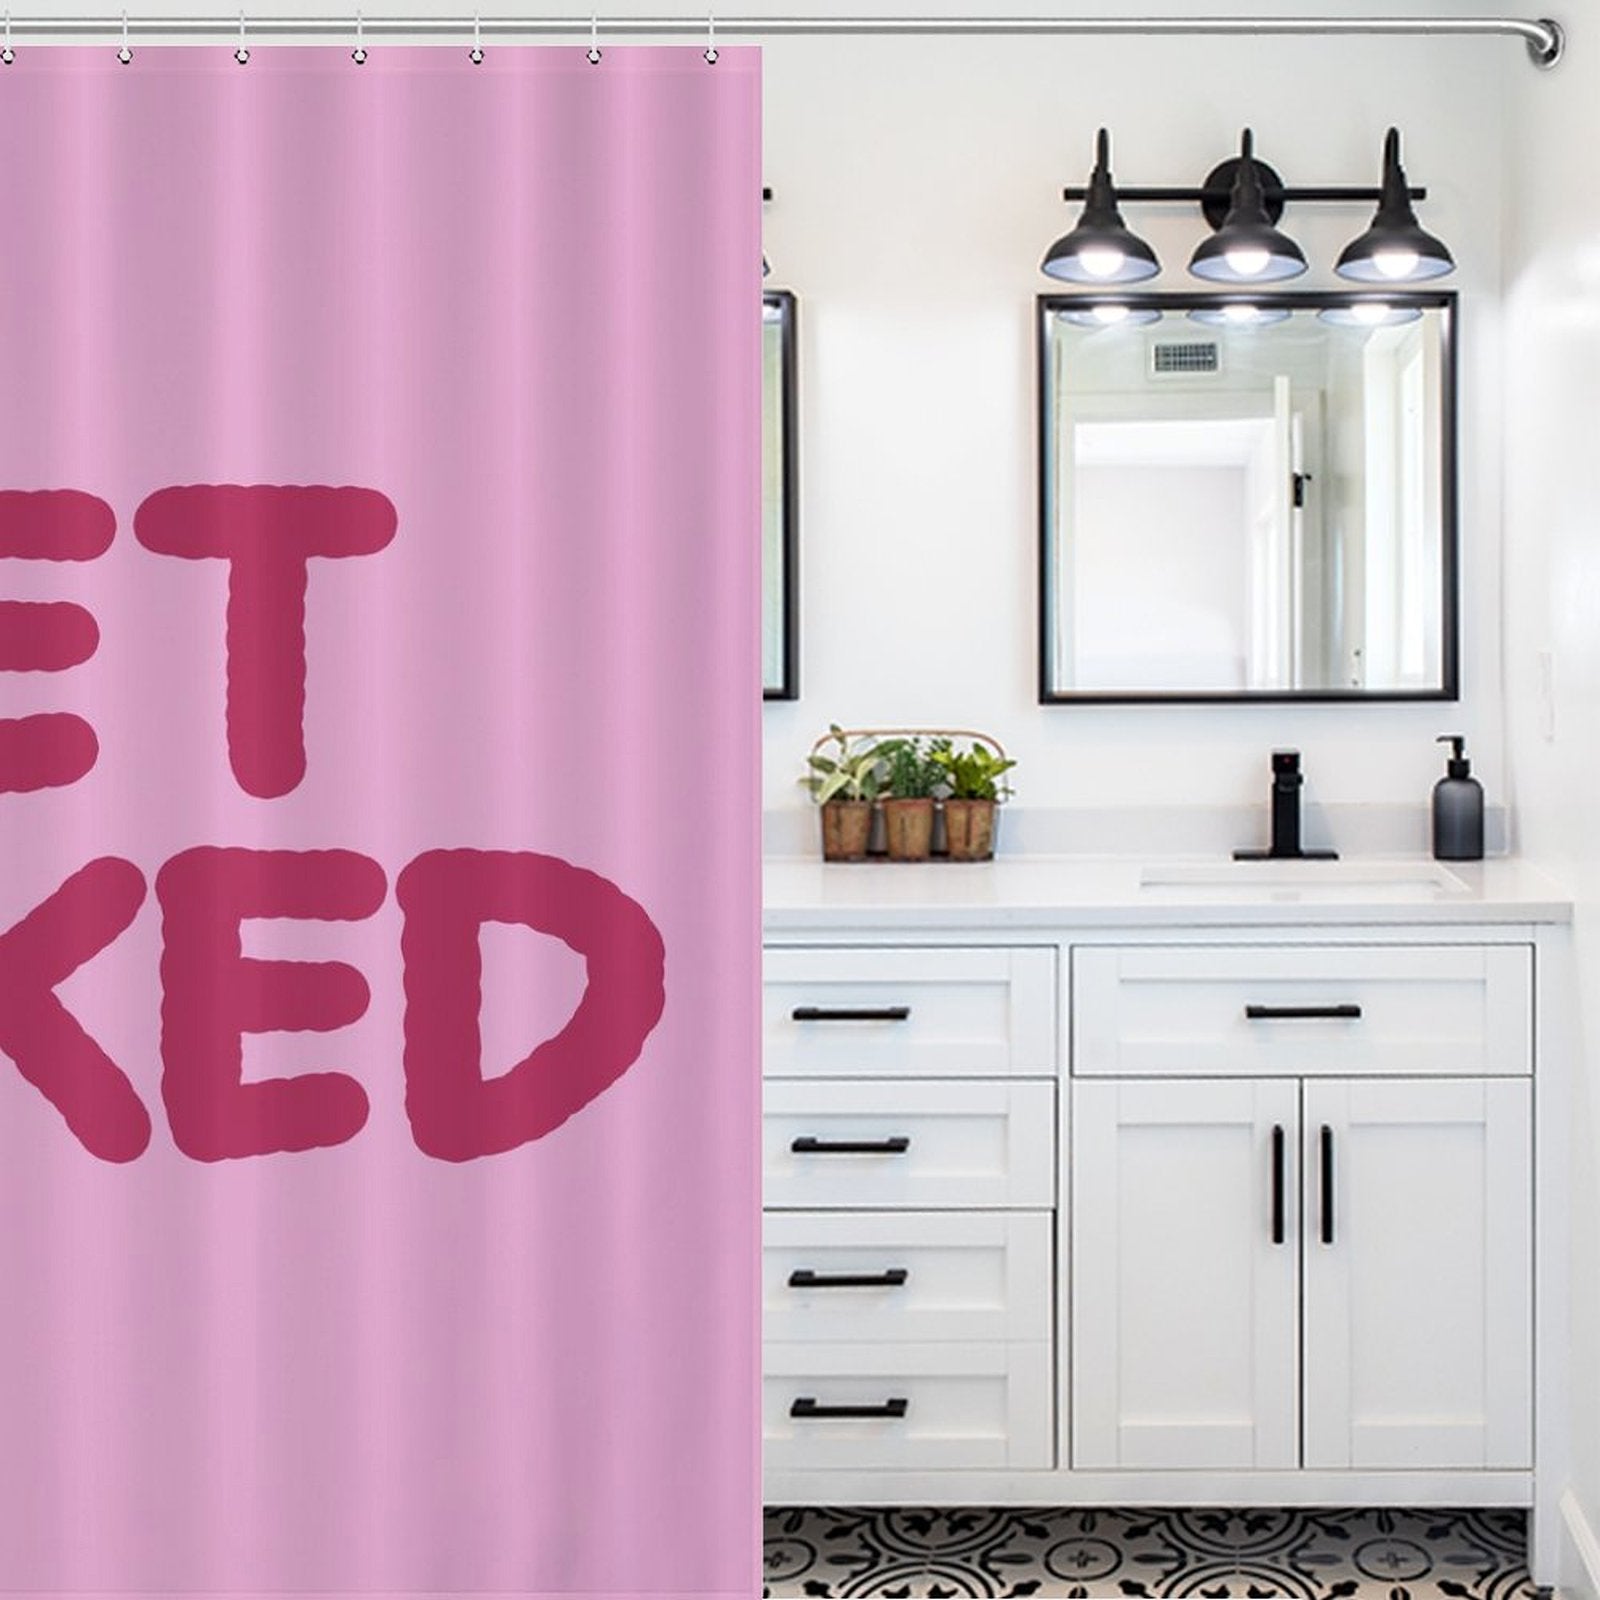 A bathroom with a white vanity, black hardware, dual mirrors, and a Simple Funny Letters Pink Get Naked Shower Curtain-Cottoncat by Cotton Cat featuring funny black and white letters adds a touch of playful bathroom decor.